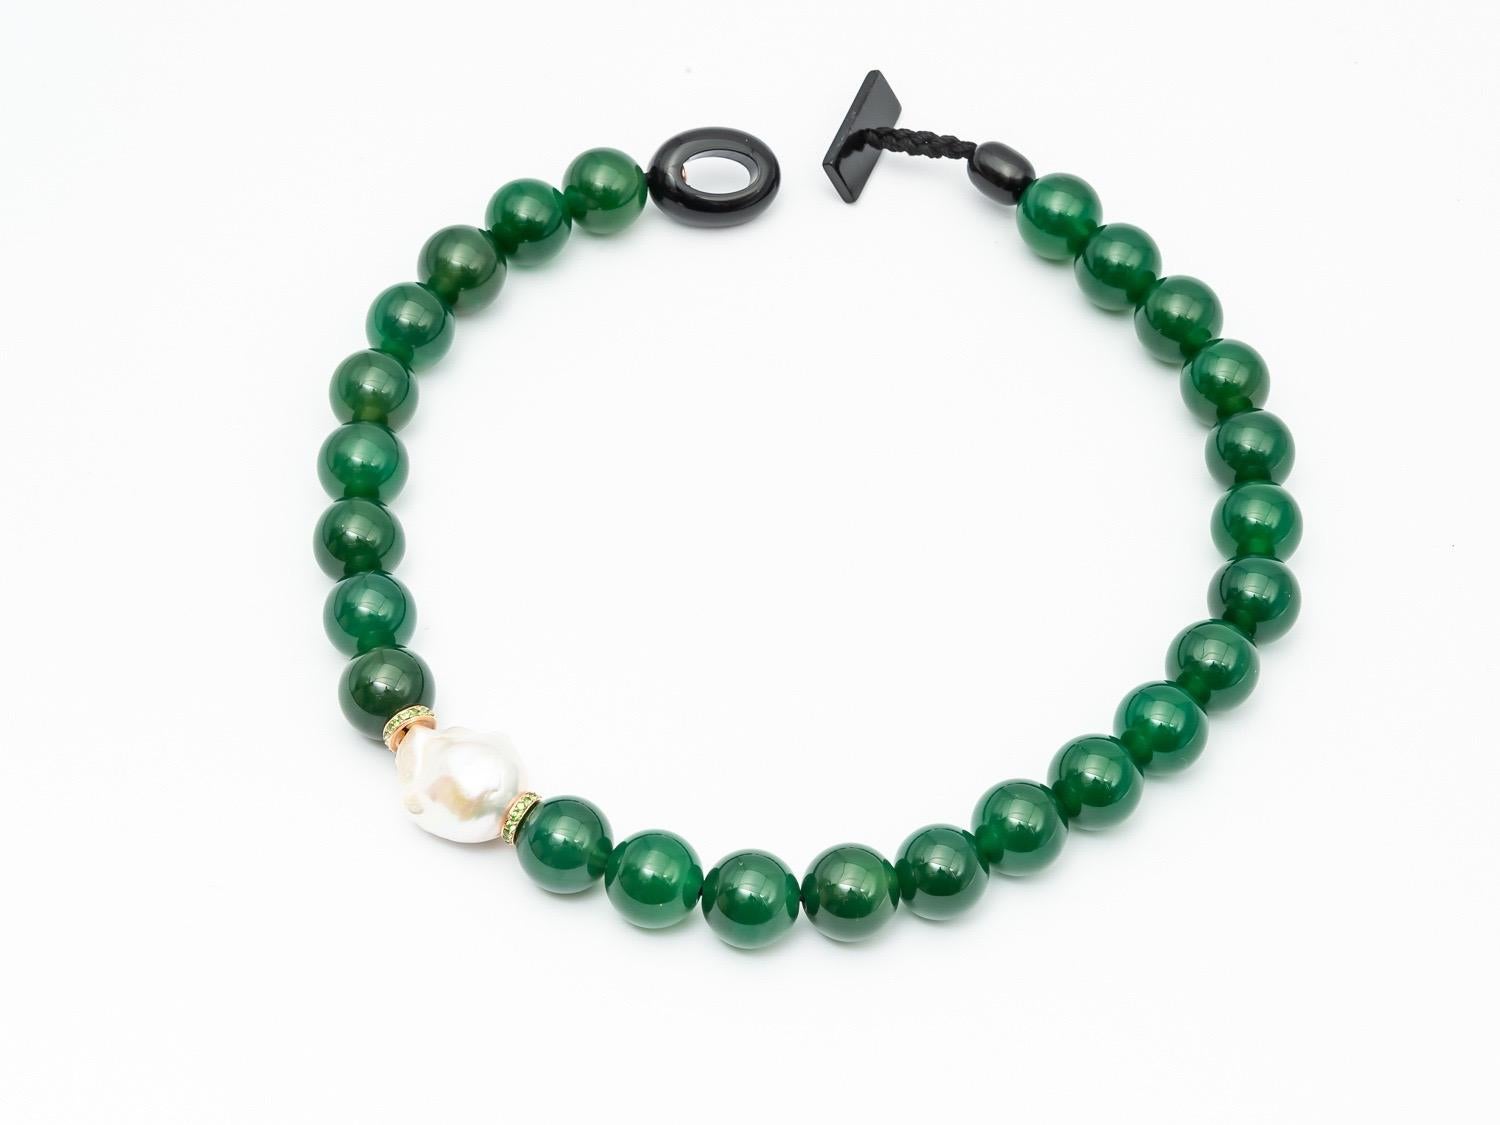 Green Agate Beads Necklace Accompanied by a Baroque Pearl and 0.32 Carats of Tsavorites
48 centimètre with Bakélite Claps 
18,89 inch
size beads 1.8 centimeter or 0.3937 inch